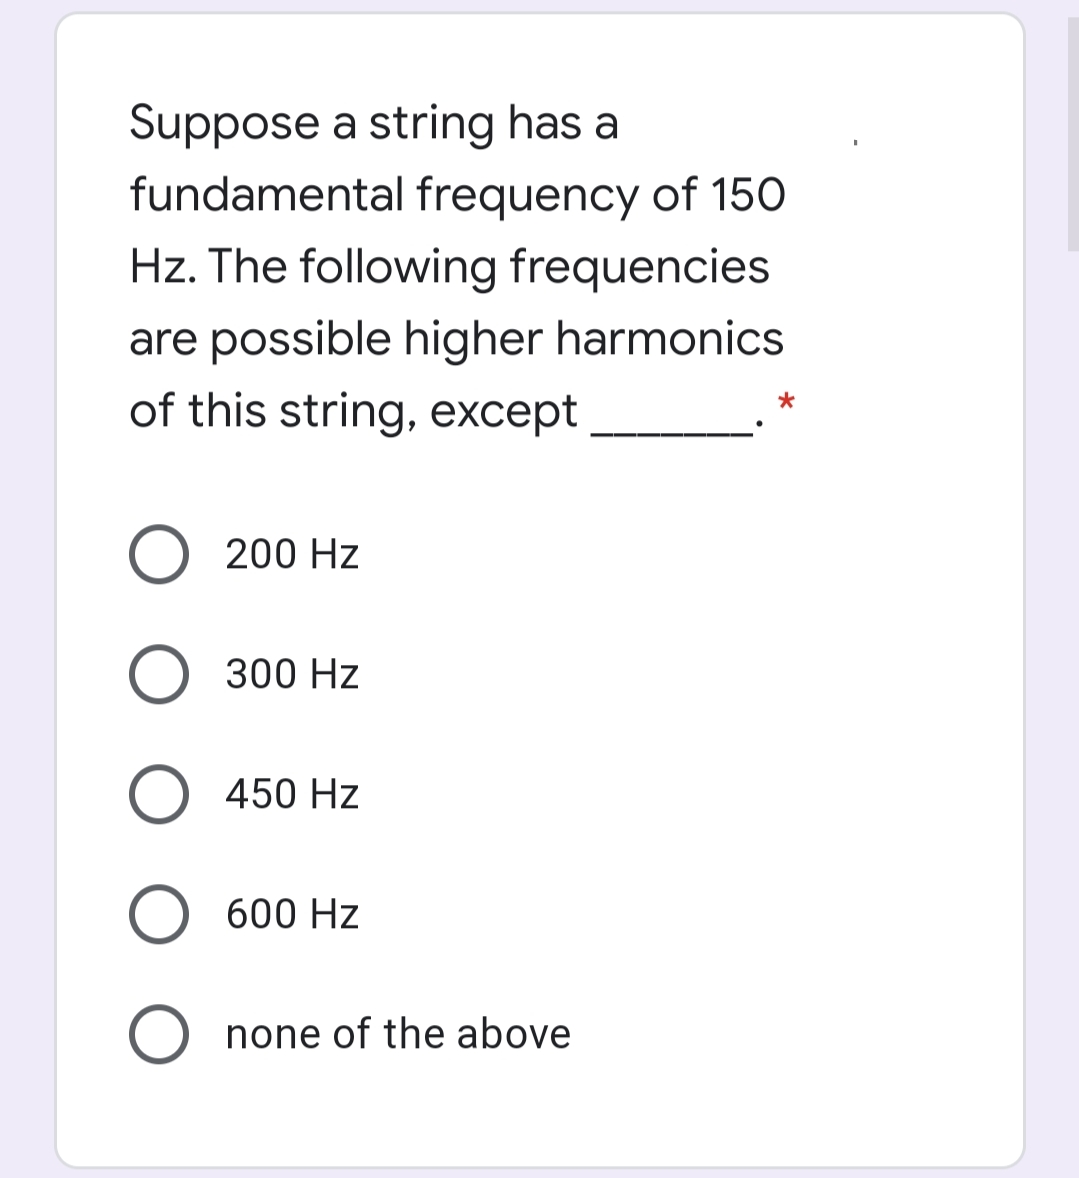 Suppose a string has a
fundamental frequency of 150
Hz. The following frequencies
are possible higher harmonics
of this string, except
O 200 Hz
O 300 Hz
O 450 Hz
600 Hz
none of the above
